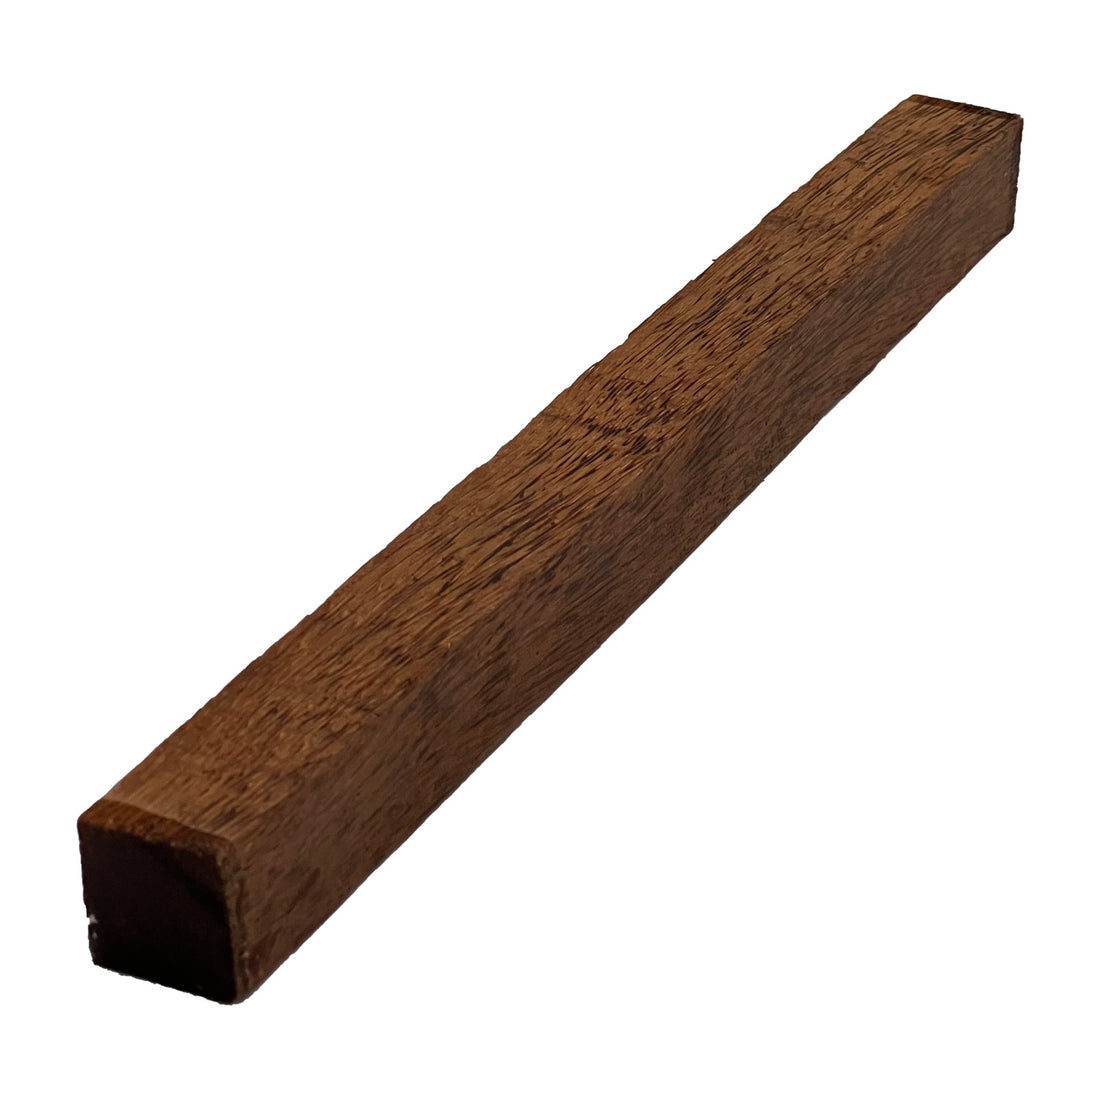 Red Palm Hobby Wood/ Turning Wood Blanks 1 x 1 x 12 inches - Exotic Wood Zone - Buy online Across USA 